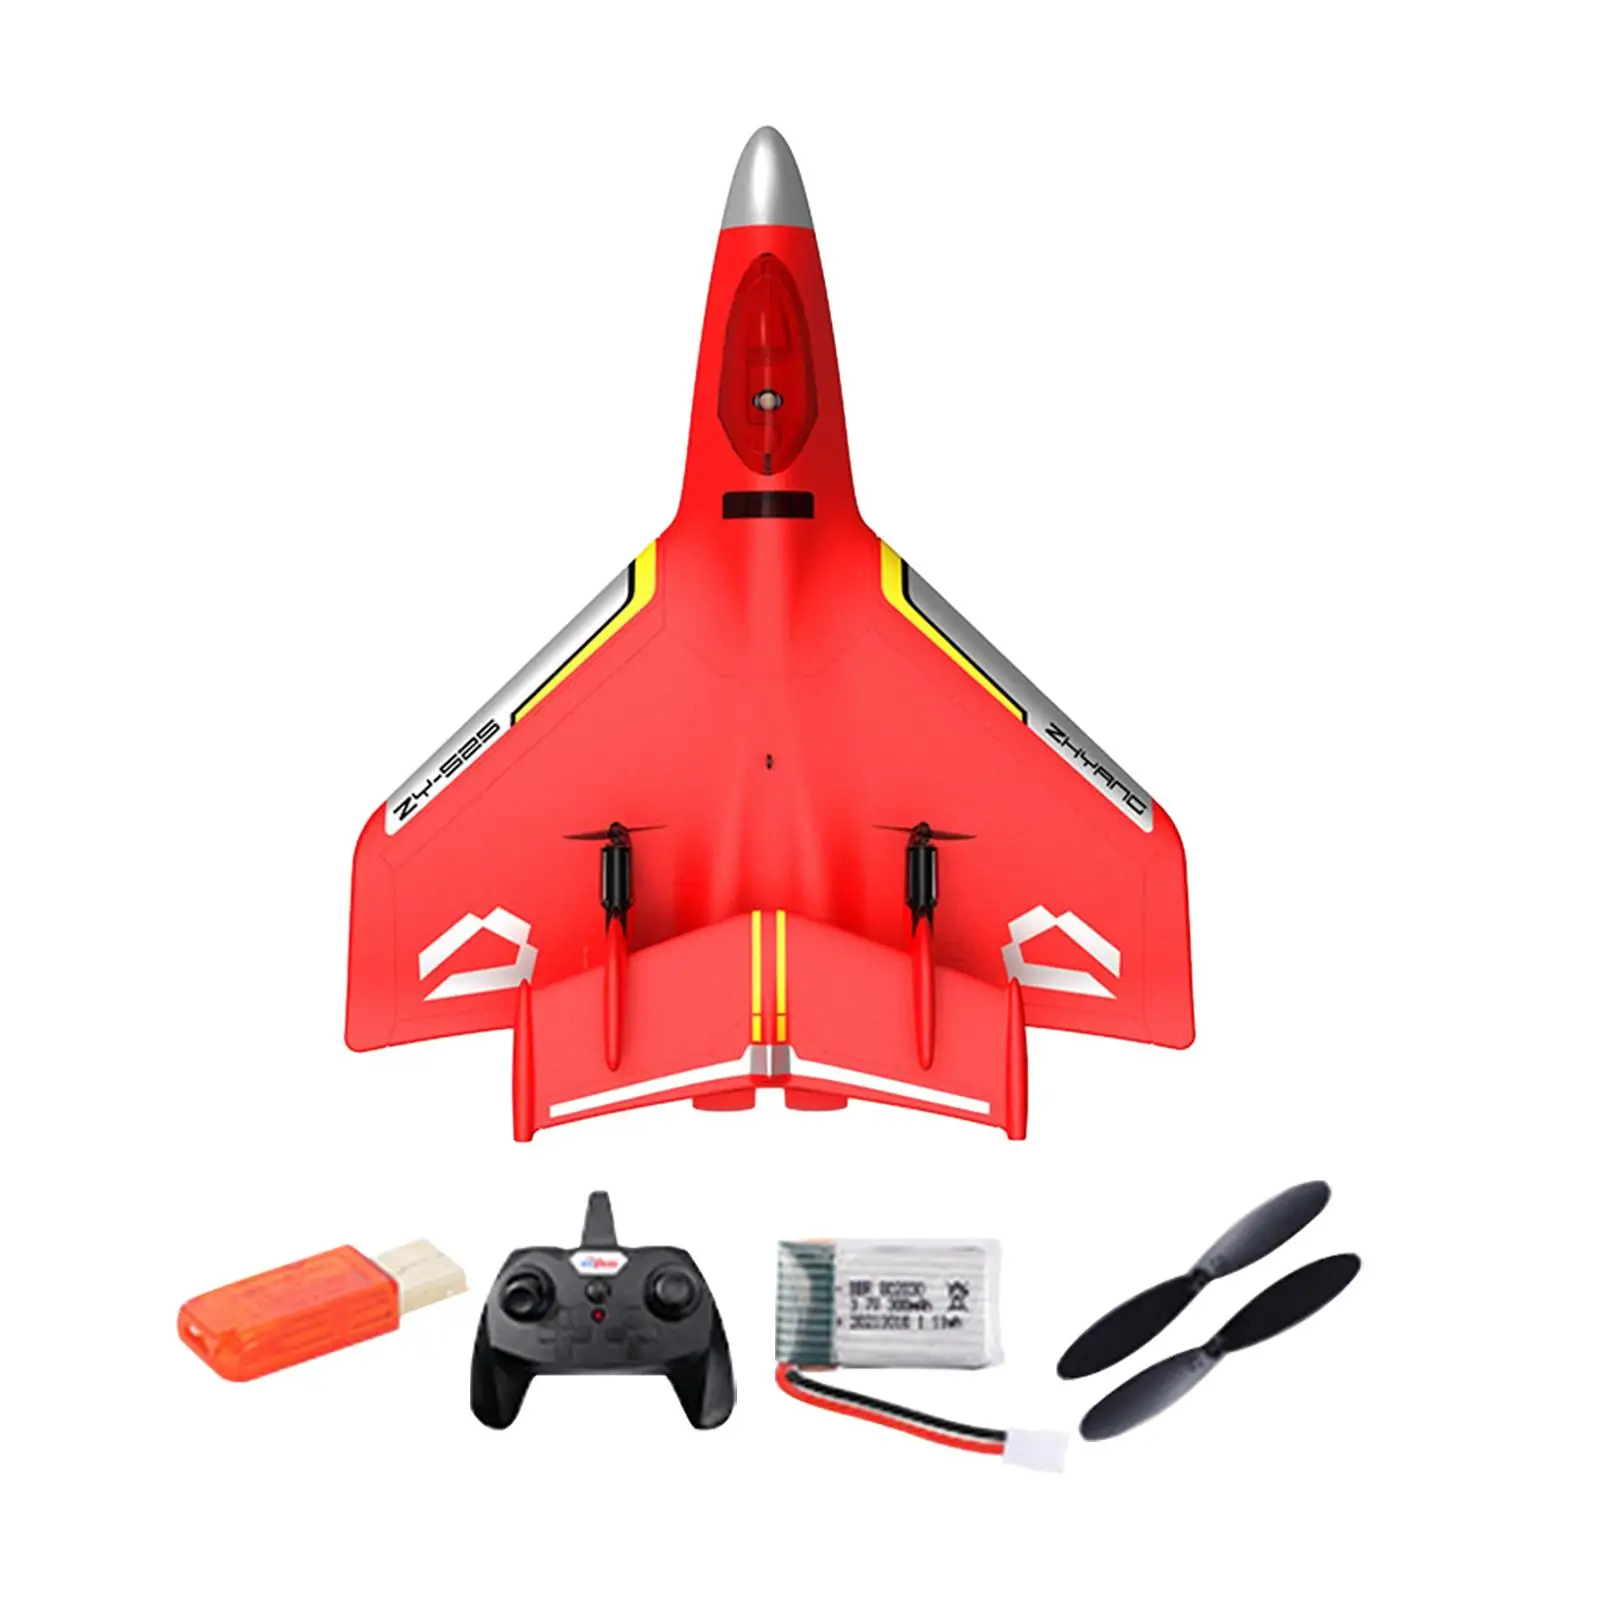 Hobby RC Airplane Lightweight Ready to Fly Plane Toy Fixed Wing RC Fighter for Girls Boys Beginner Holiday Present Adults Kids